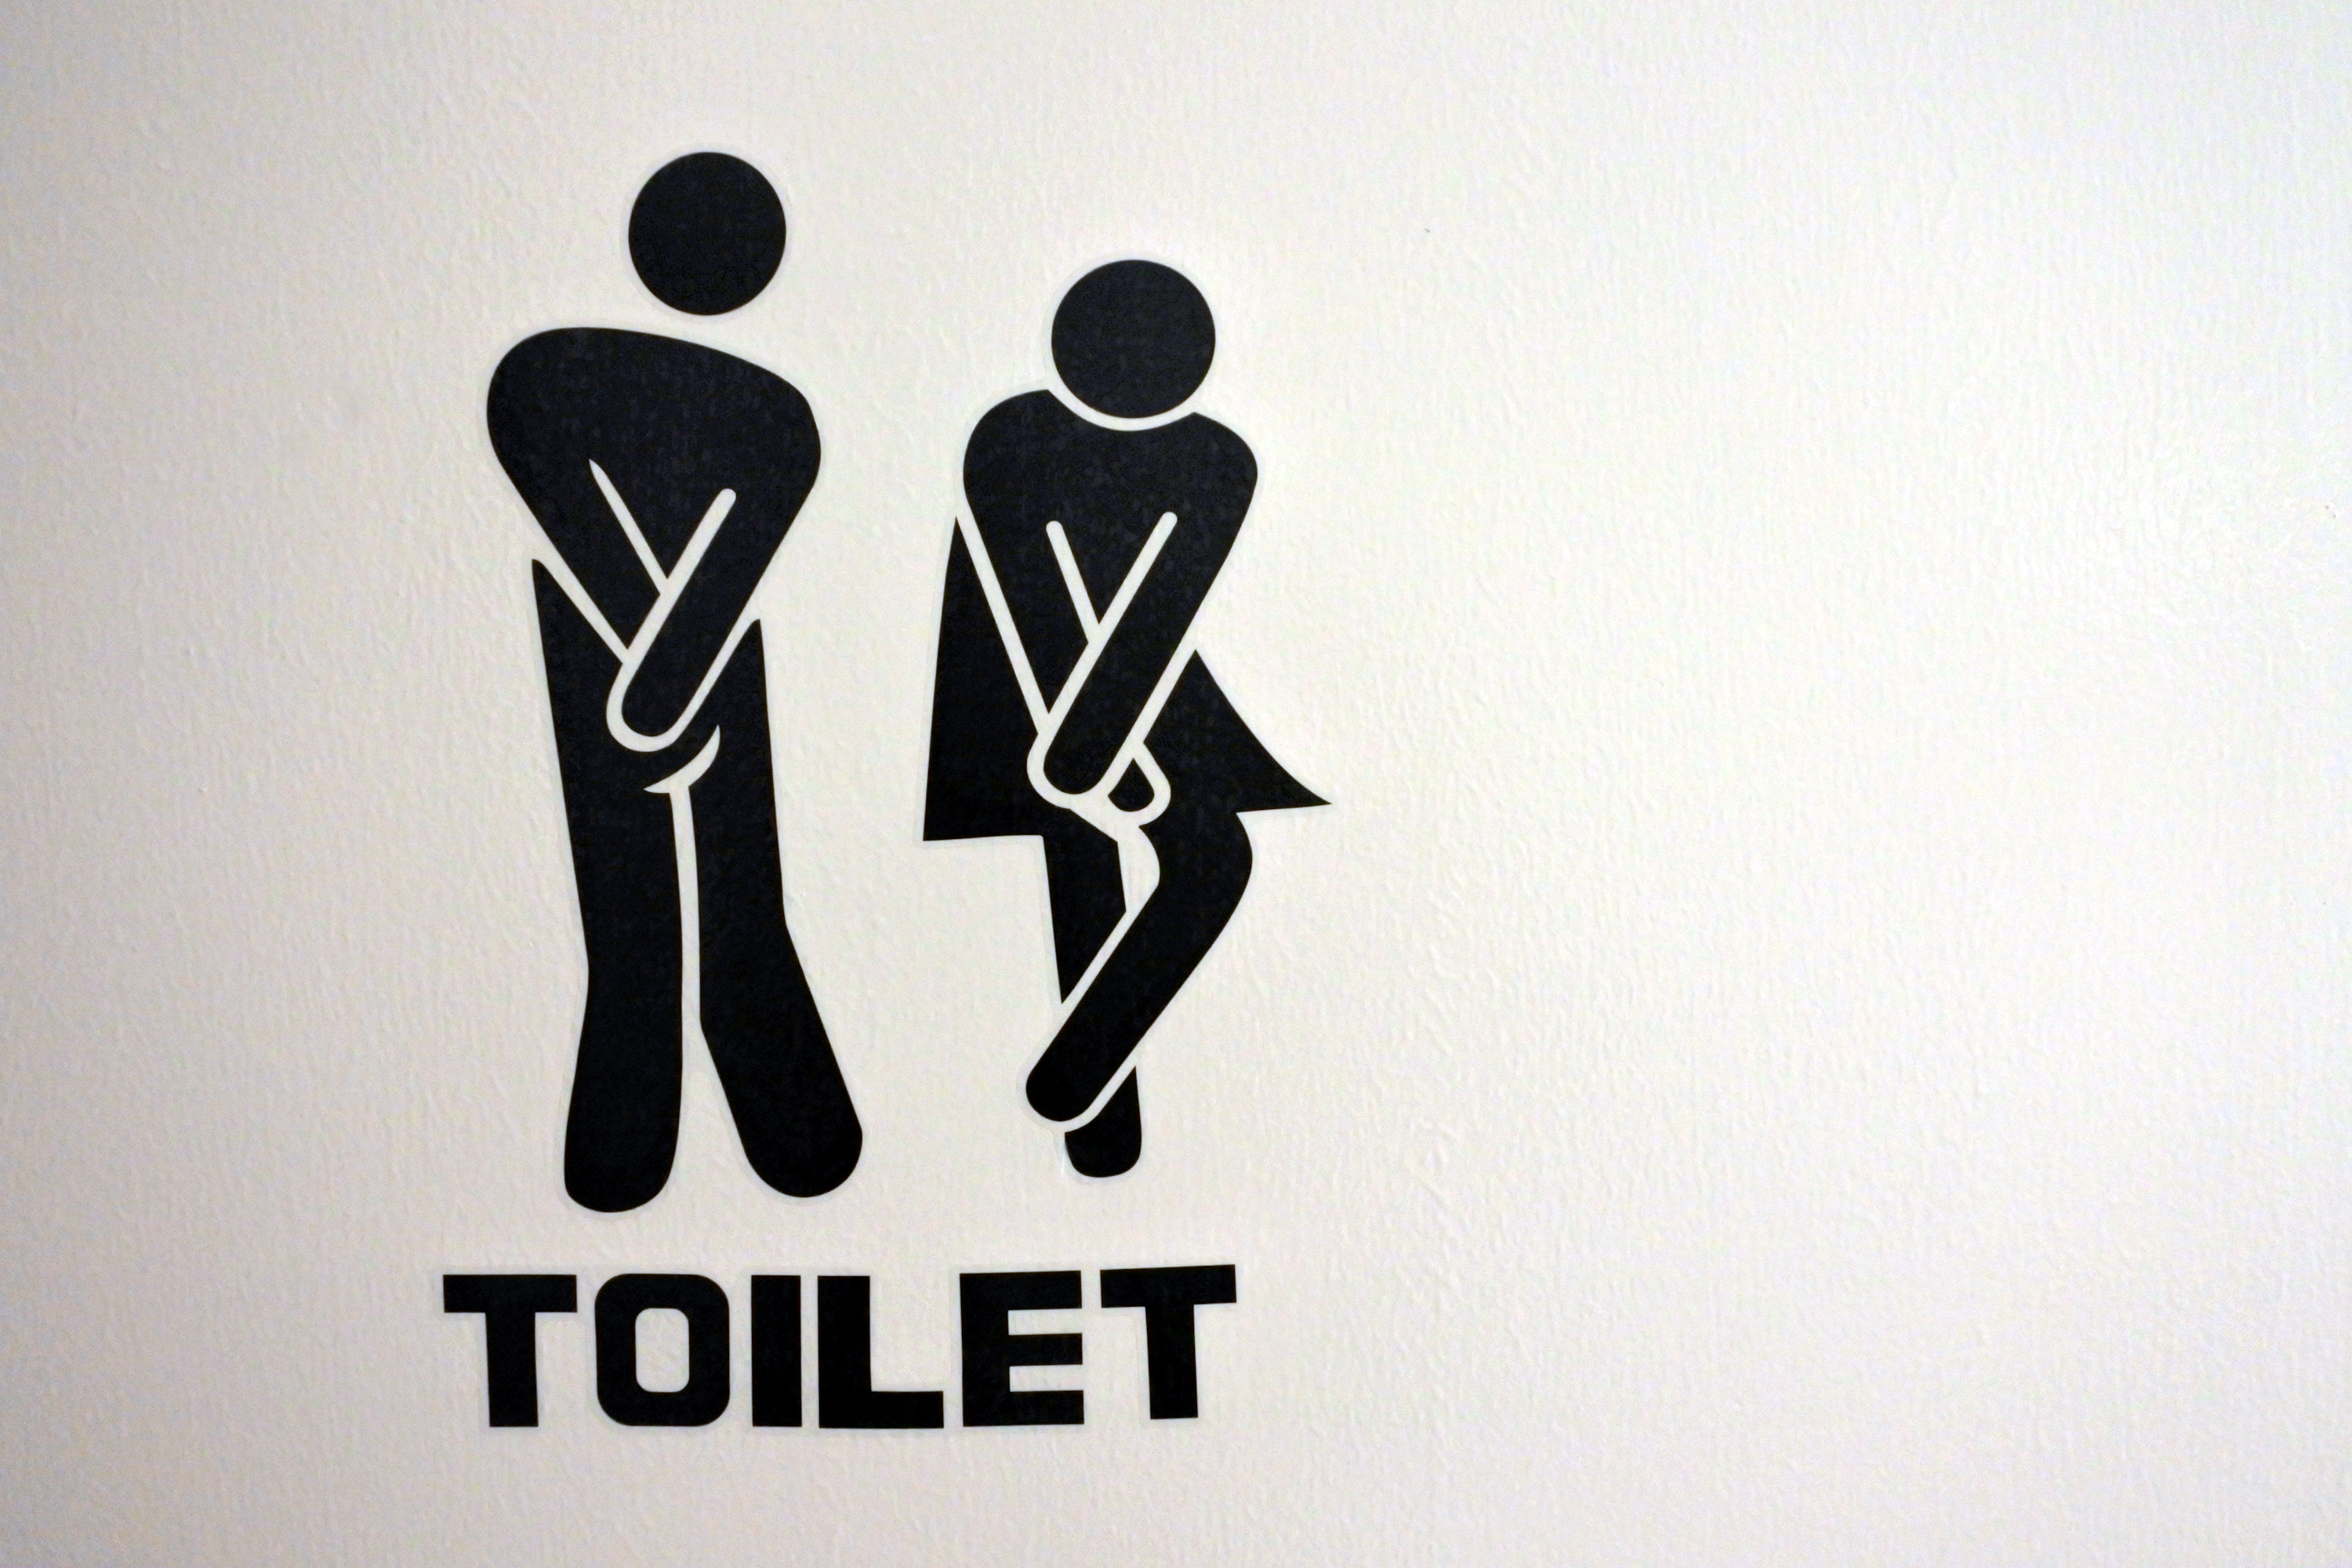 One of the symptoms of urinary tract inflammation is frequent use of the toilet